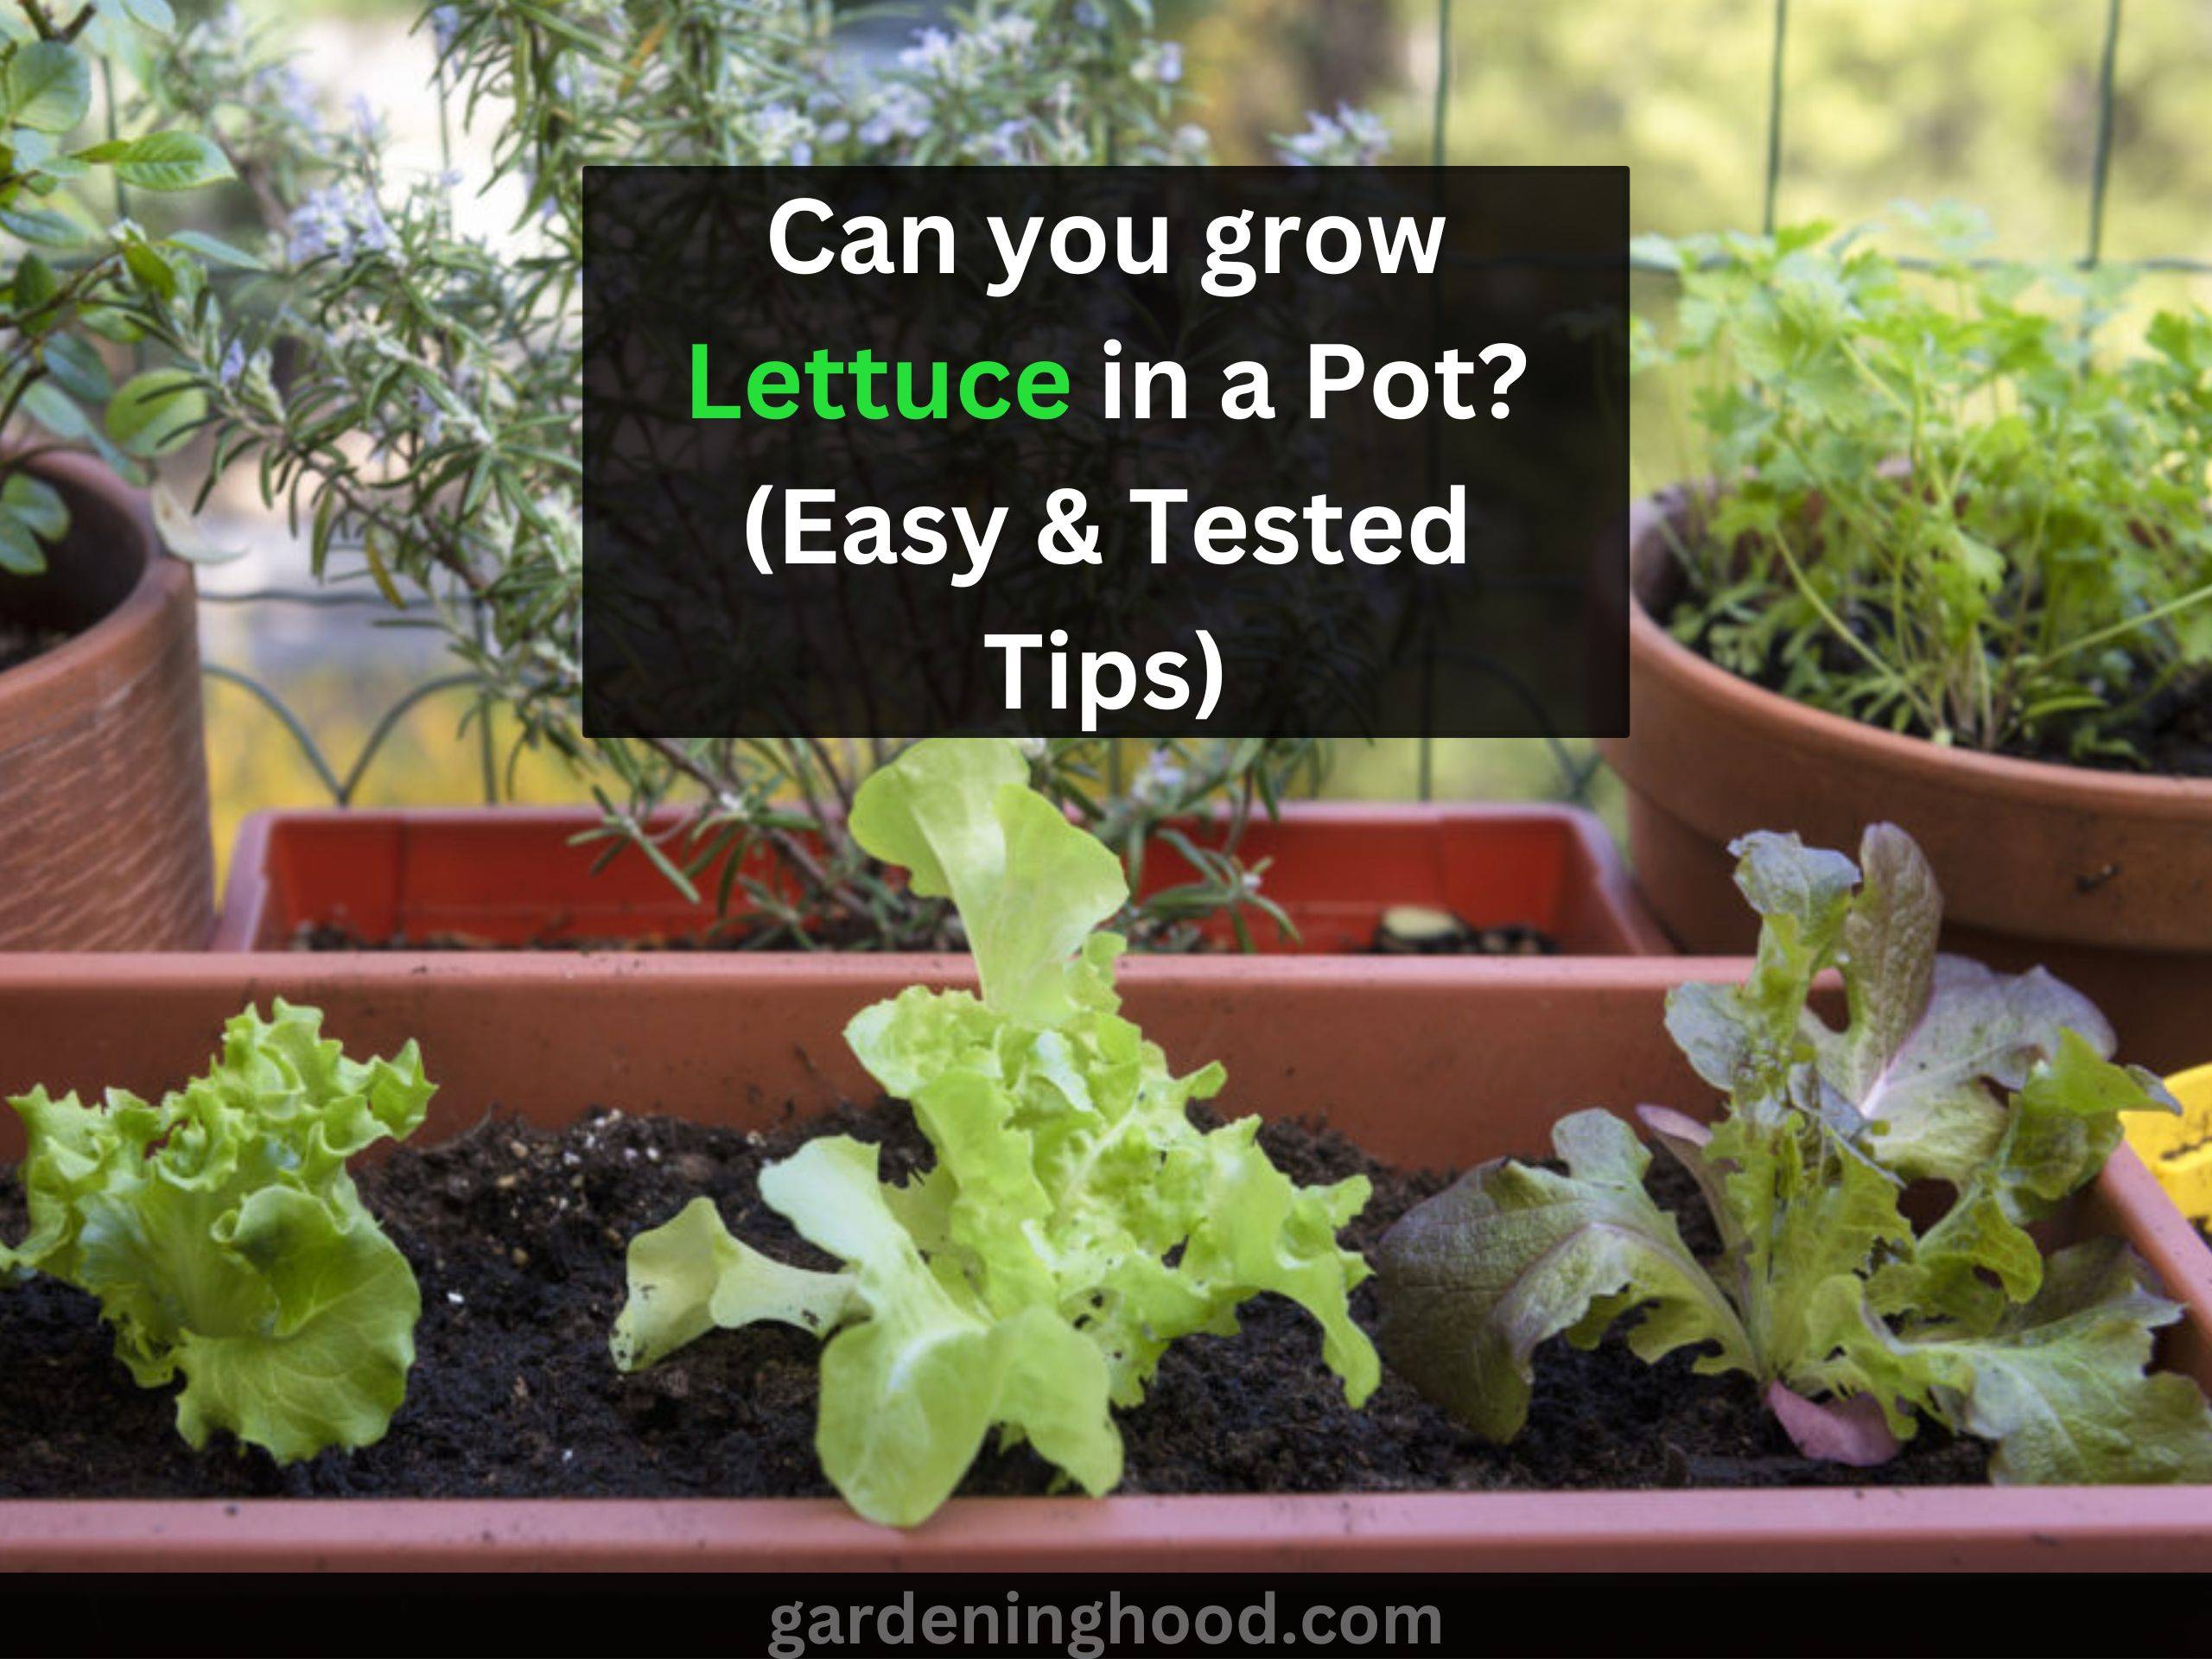 Can you grow Lettuce in a Pot? (Easy & Tested Tips)